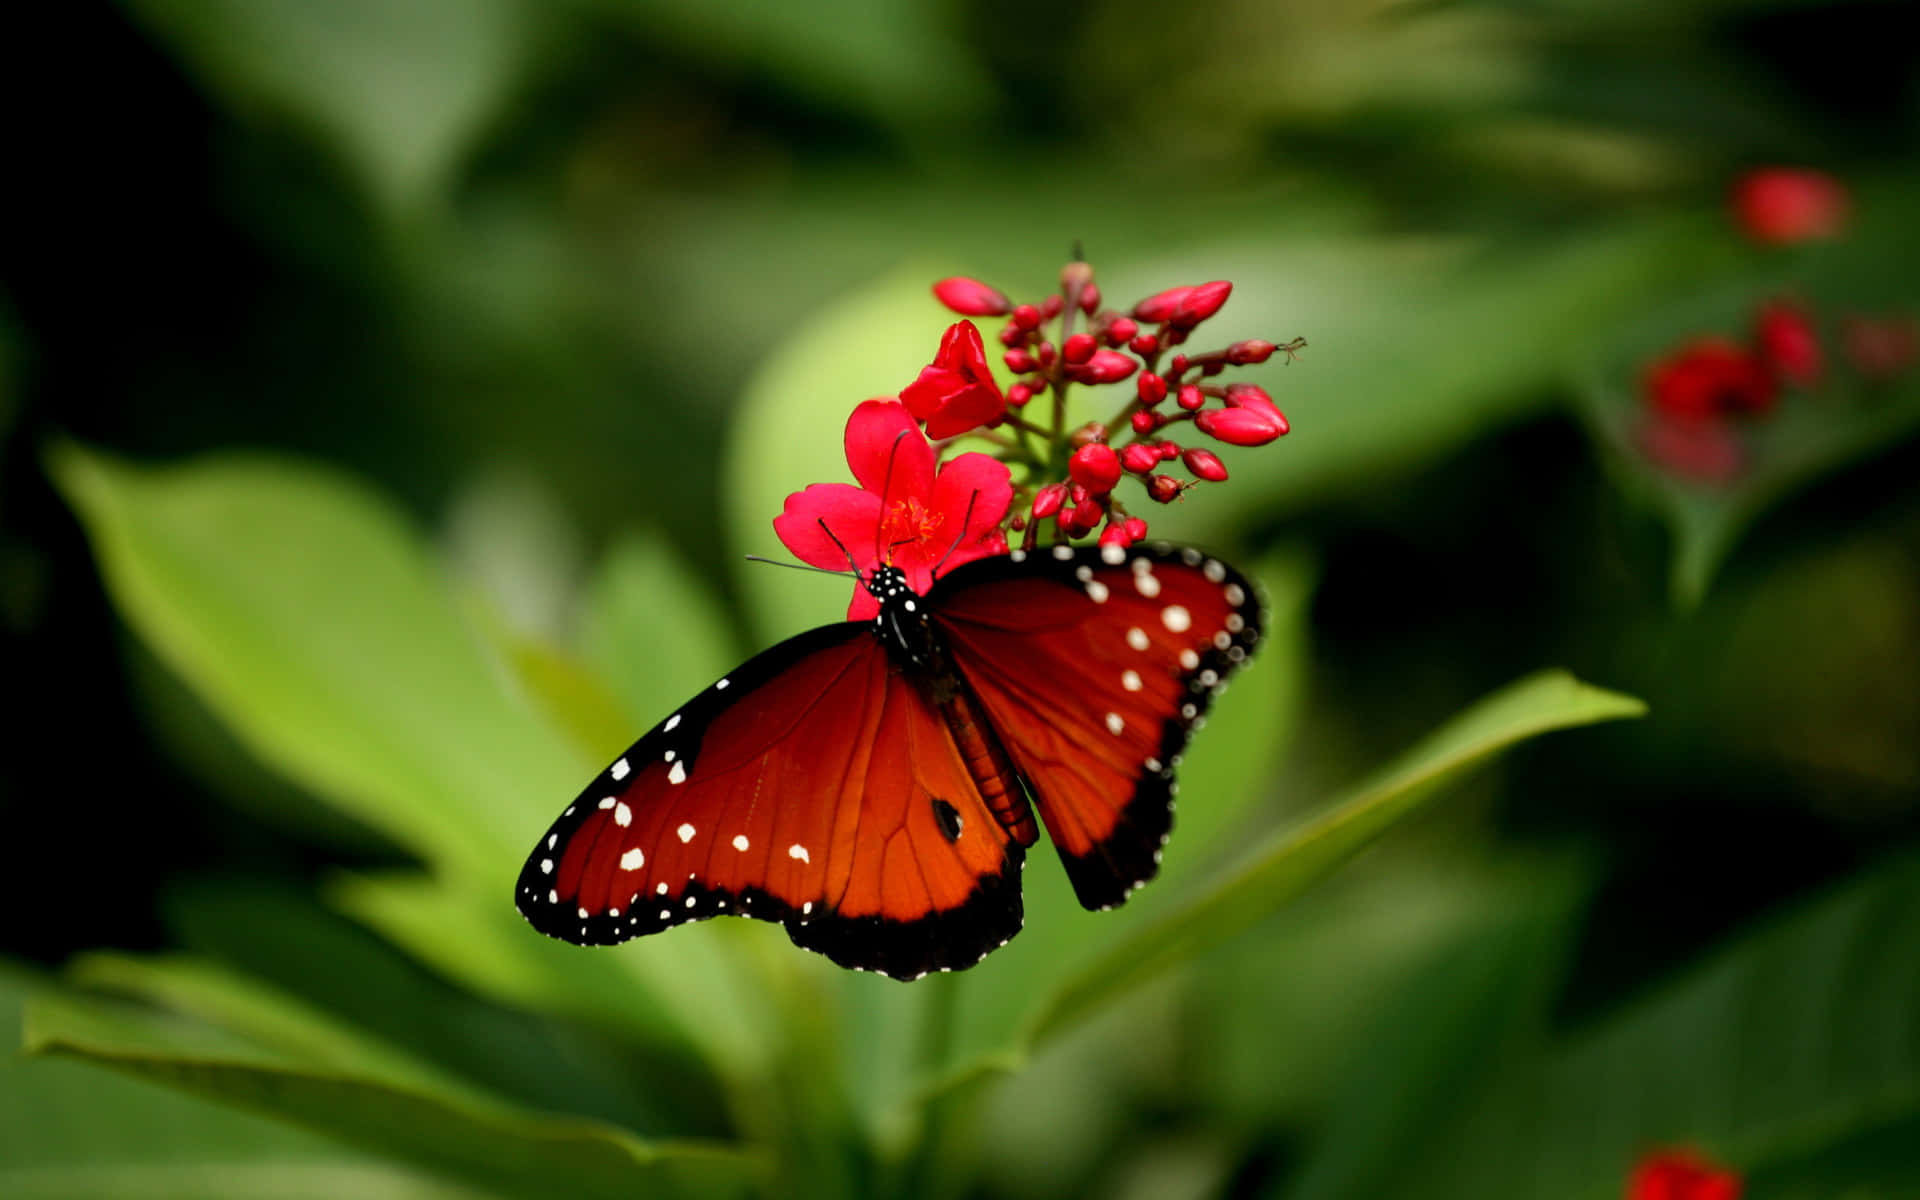 A stunningly beautiful butterfly flitting around in its natural environment.